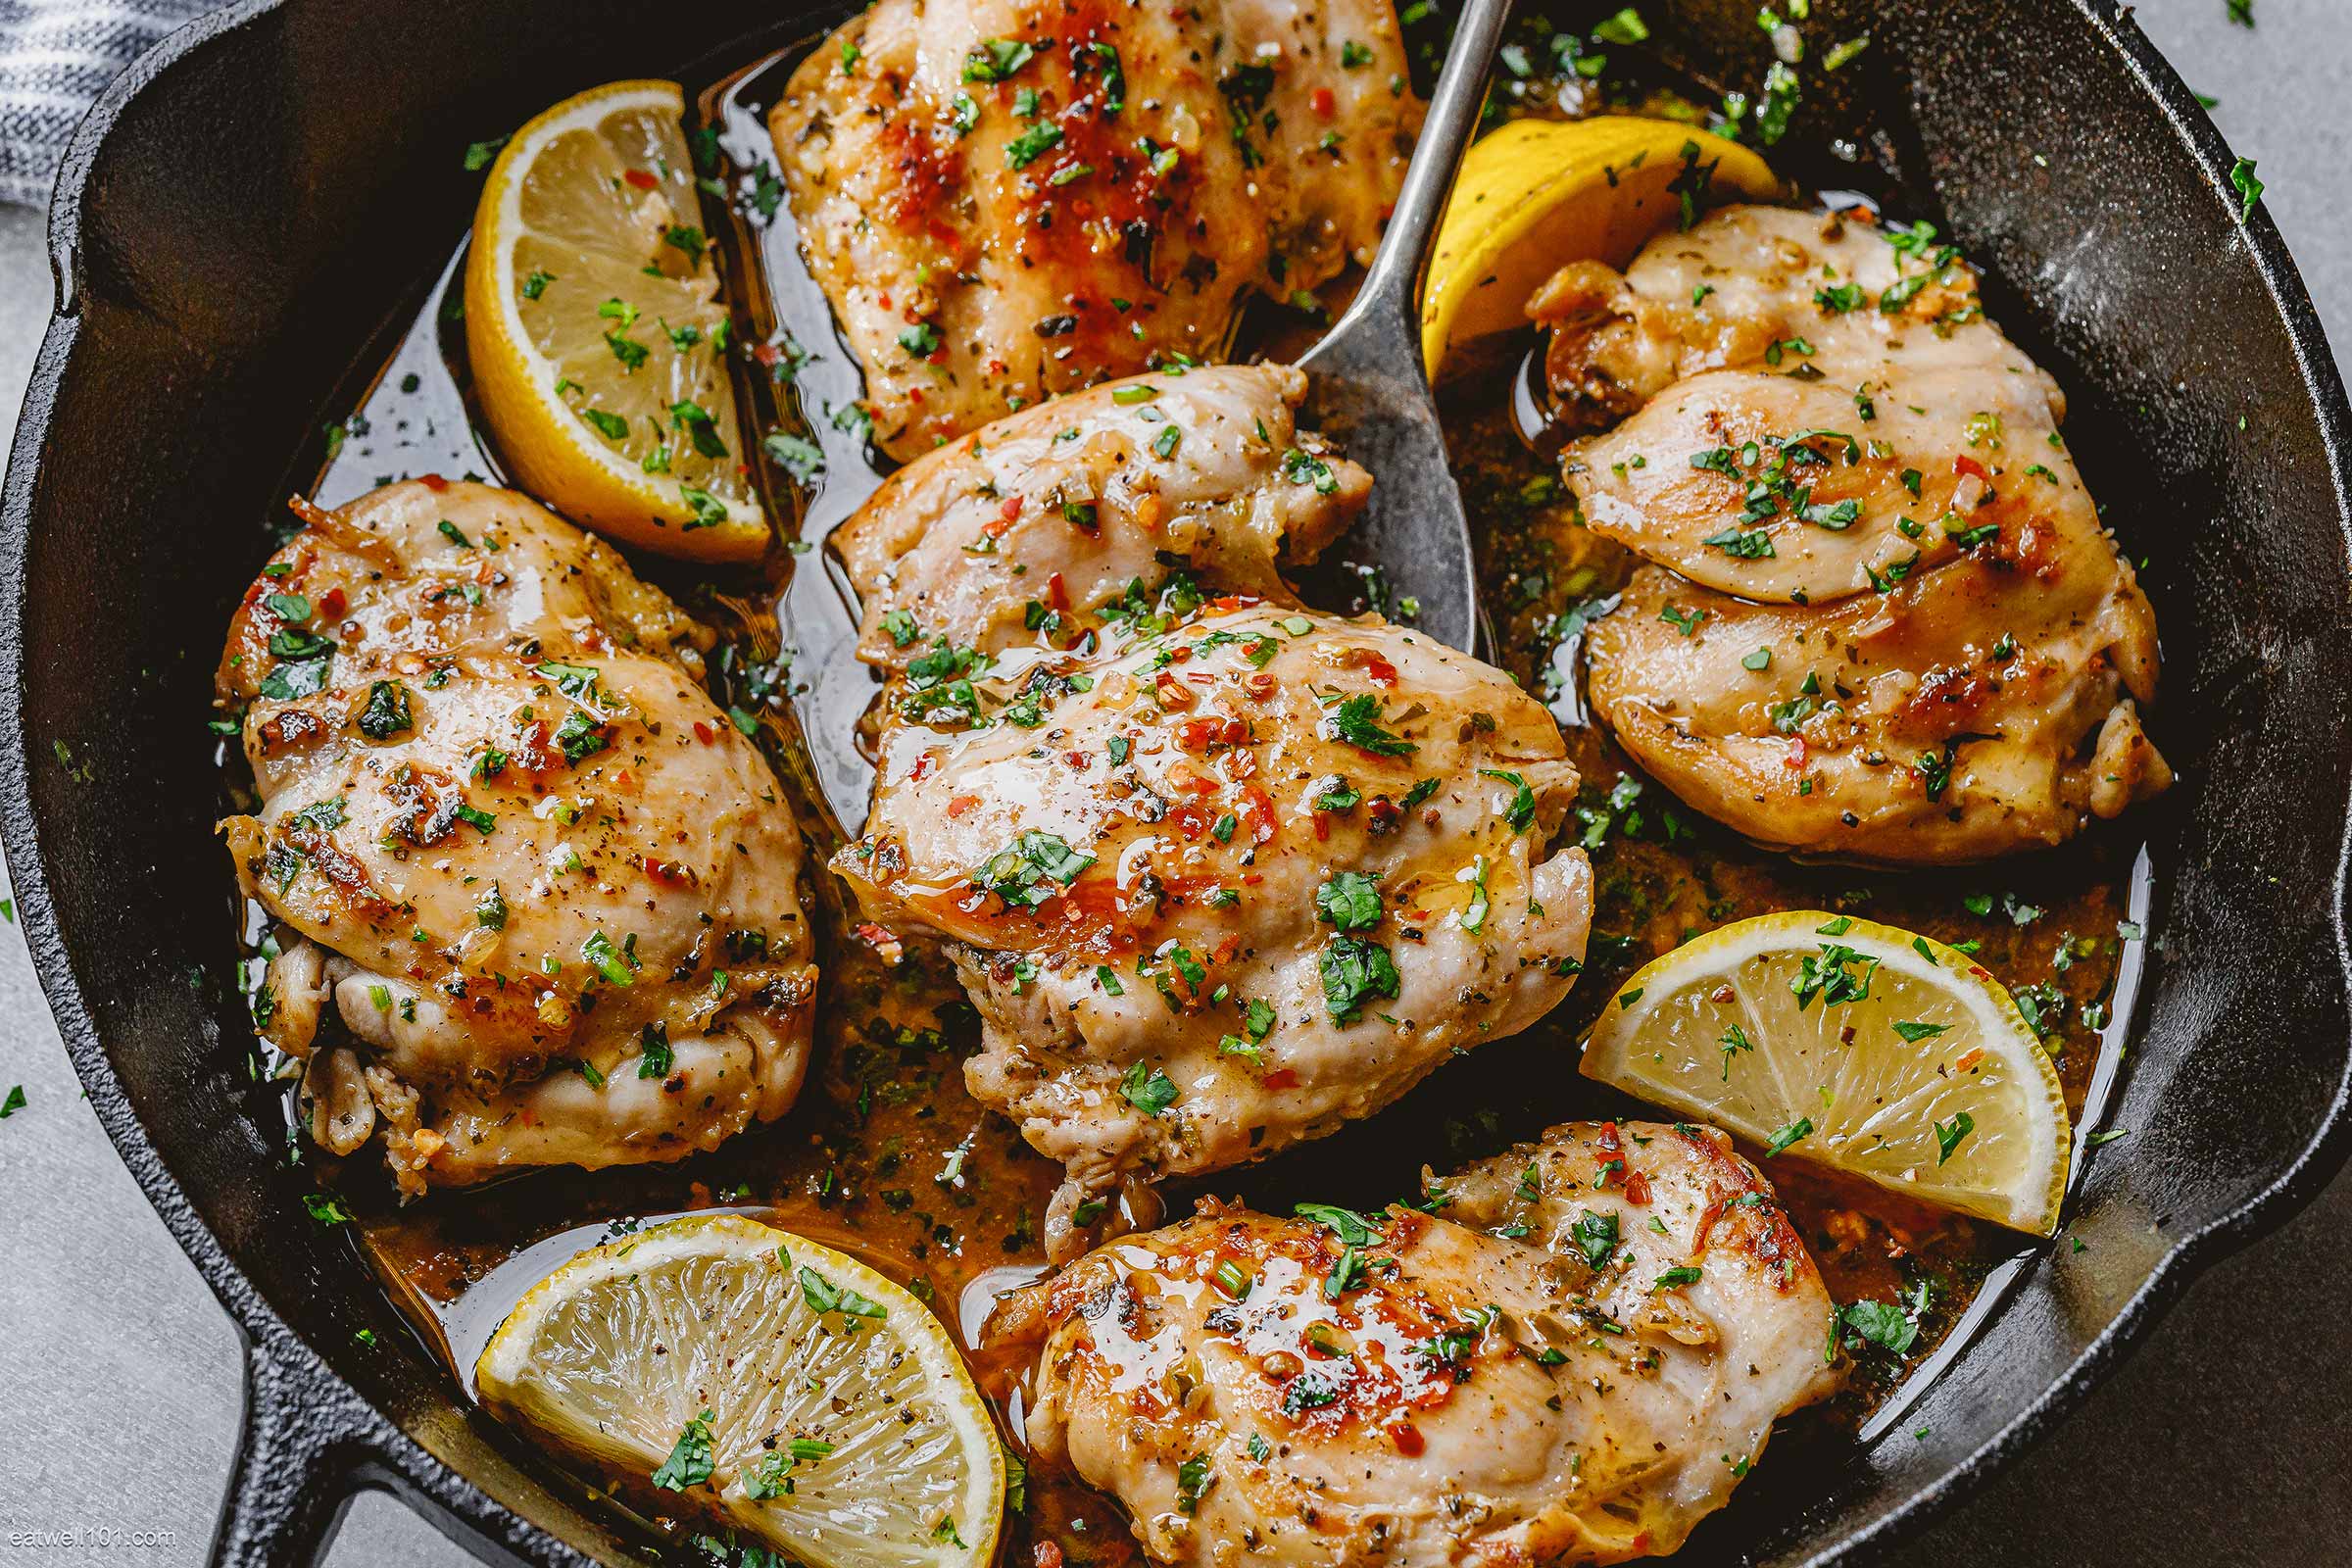 How To Make Amazing Baked Lemon Garlic Chicken Thighs And Potatoes